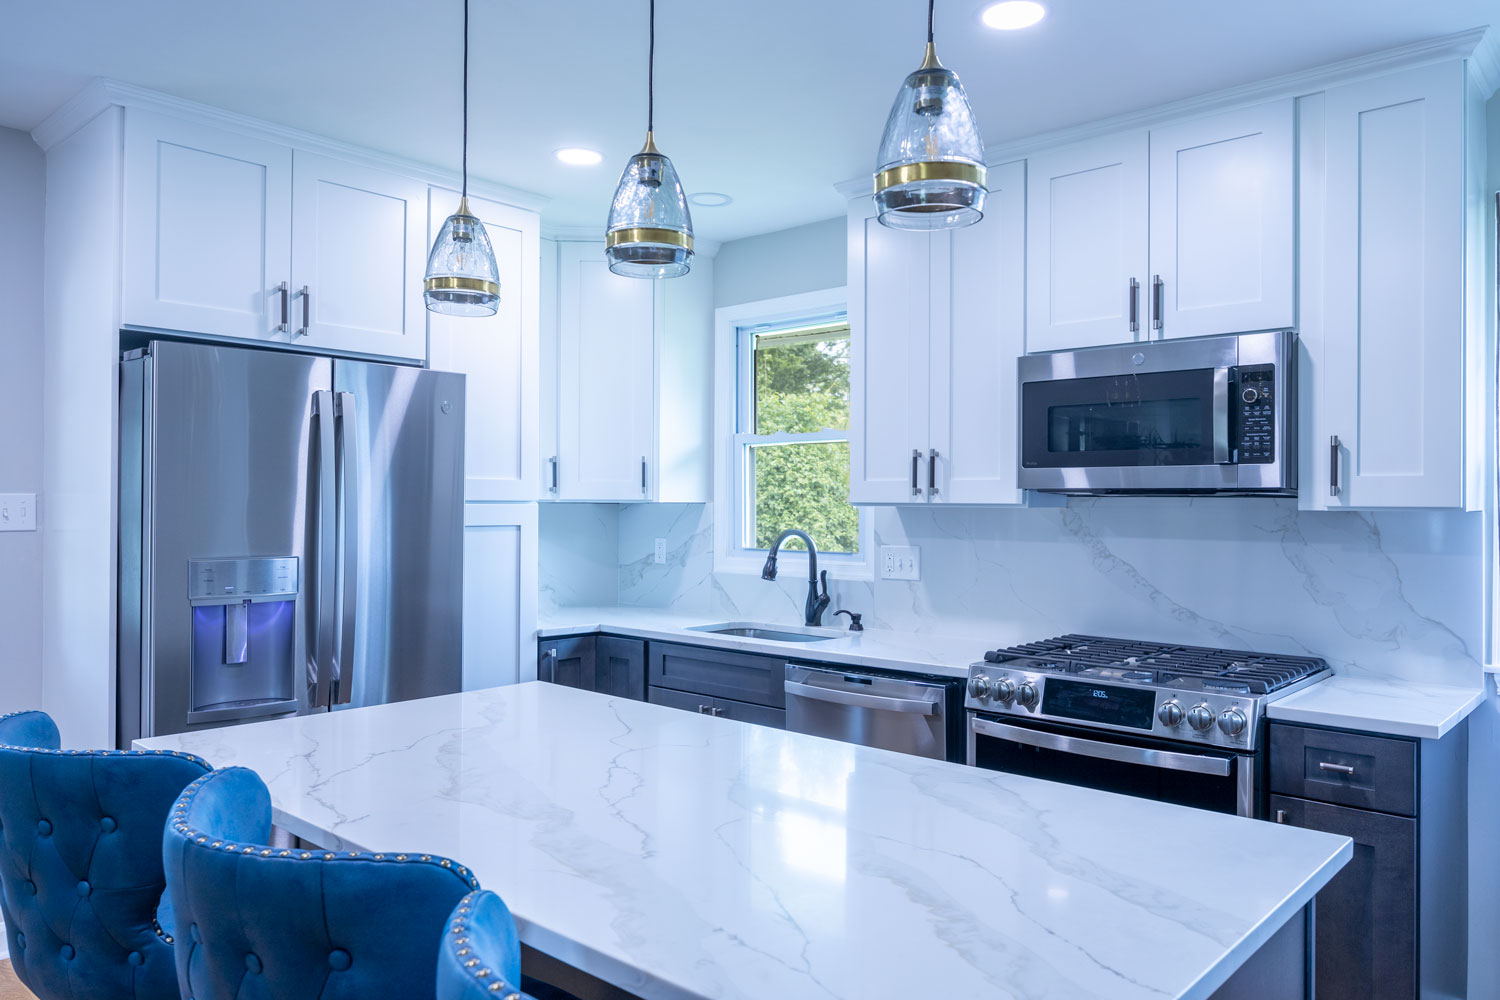 Transform your kitchen with our expert remodeling contractors in Maryland. We specialize in designing functional and beautiful spaces that reflect your unique style. Get a free estimate today!